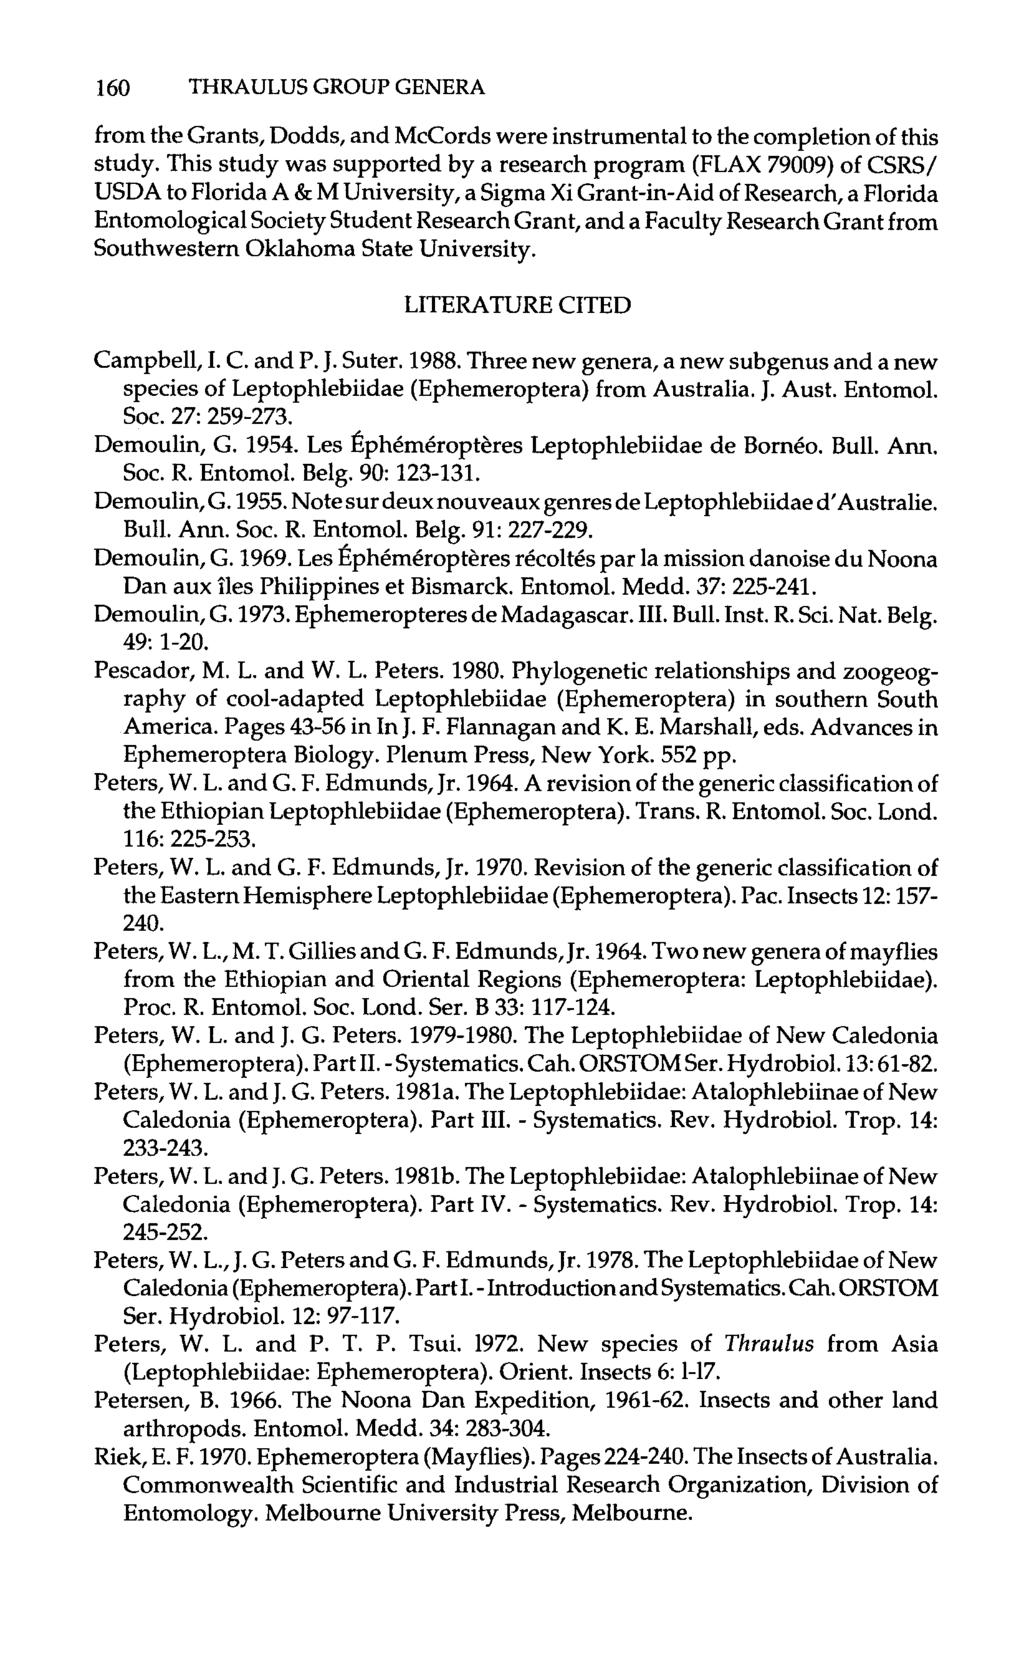 160 THRAULUS GROUP GENERA from the Grants, Dodds, and McCords were instrumental to the completion of this study.